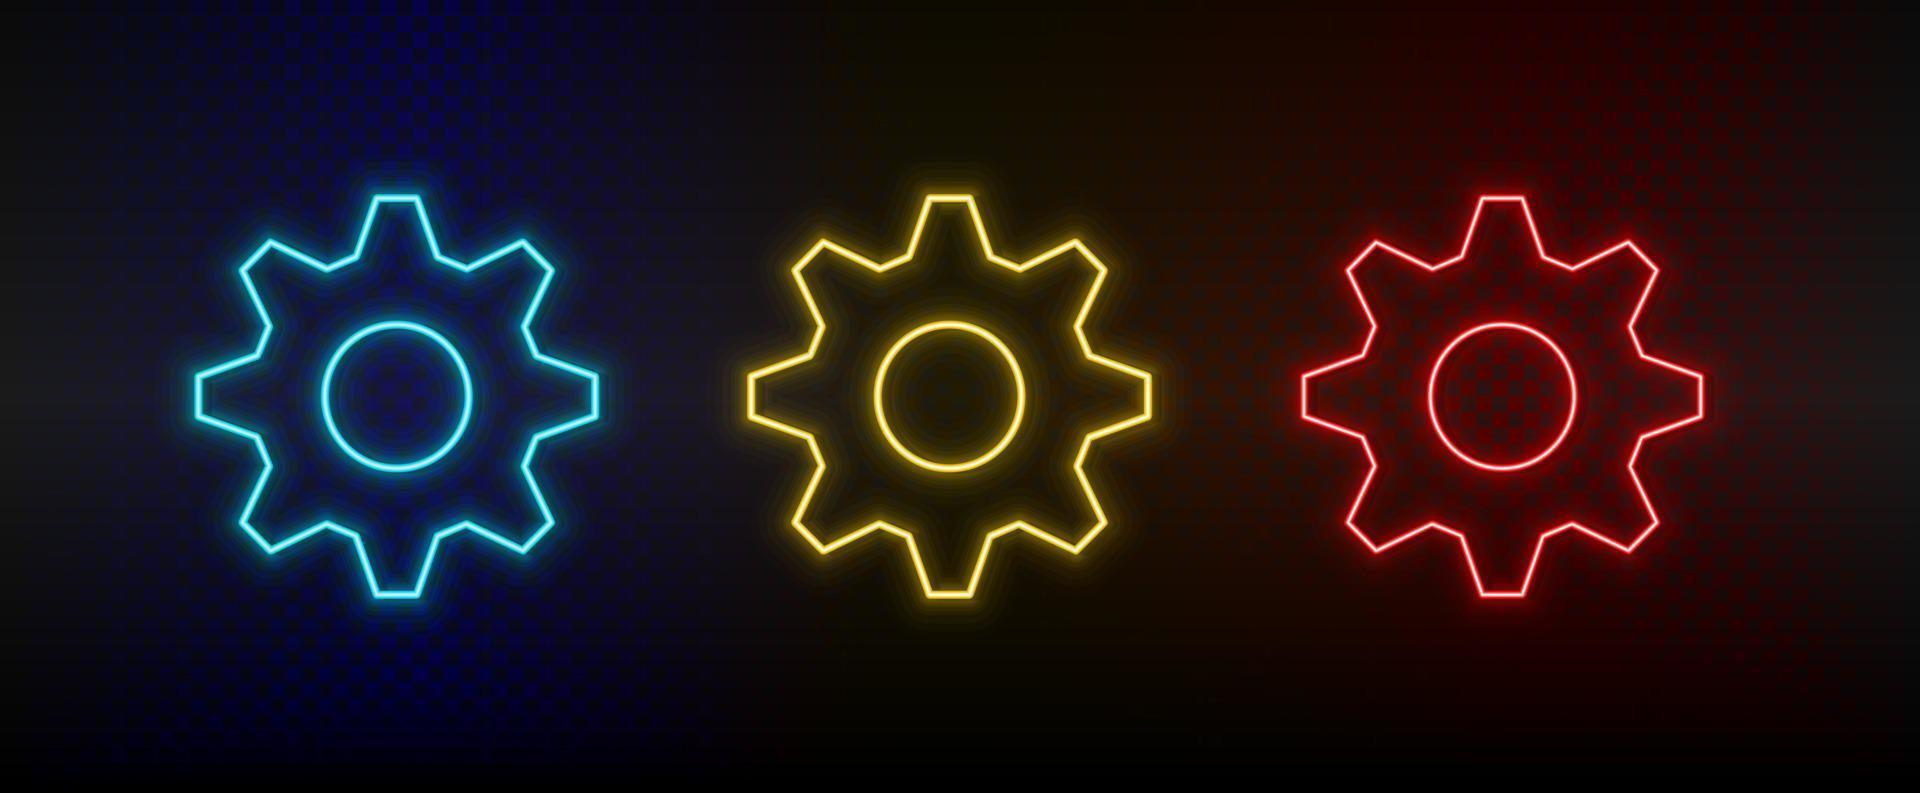 Neon icon set settings. Set of red, blue, yellow neon vector icon on dark transparent background